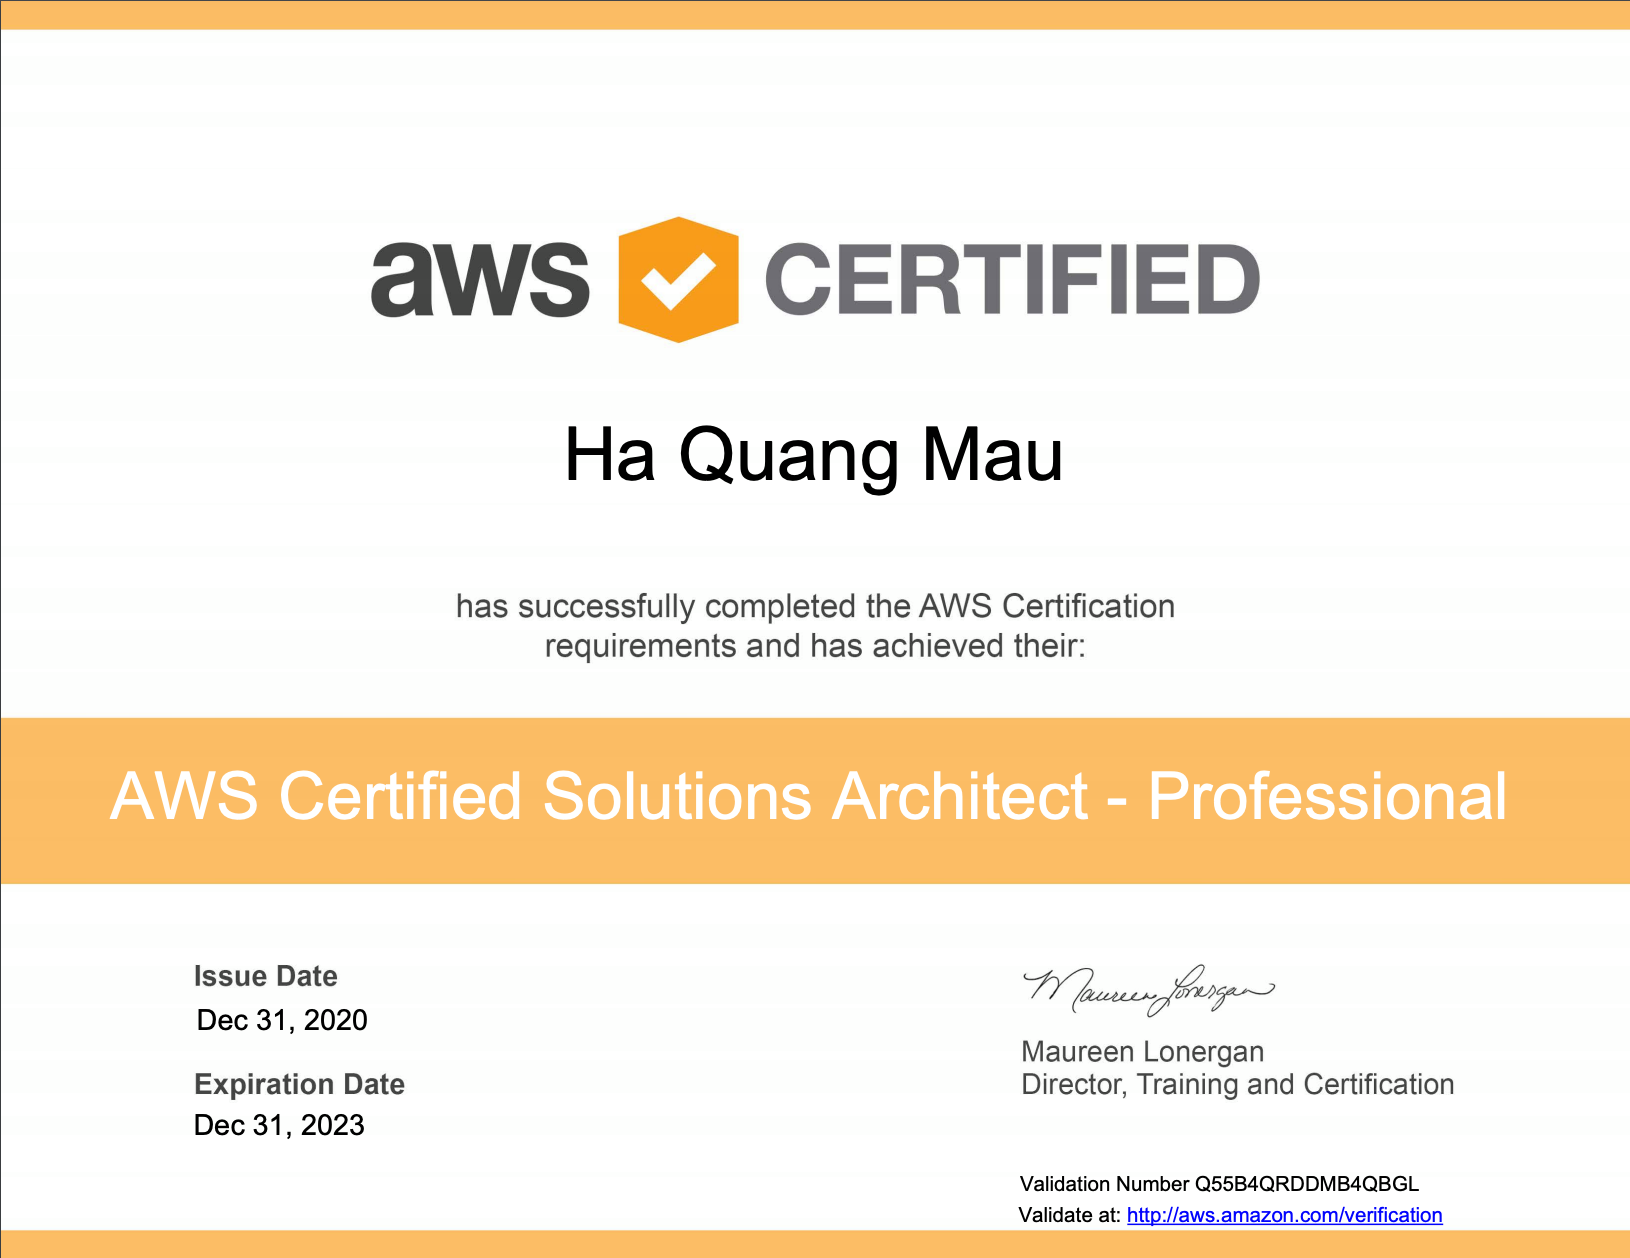 Kinh nghiệm thi chứng chỉ AWS Certified Solutions Architect - Professional